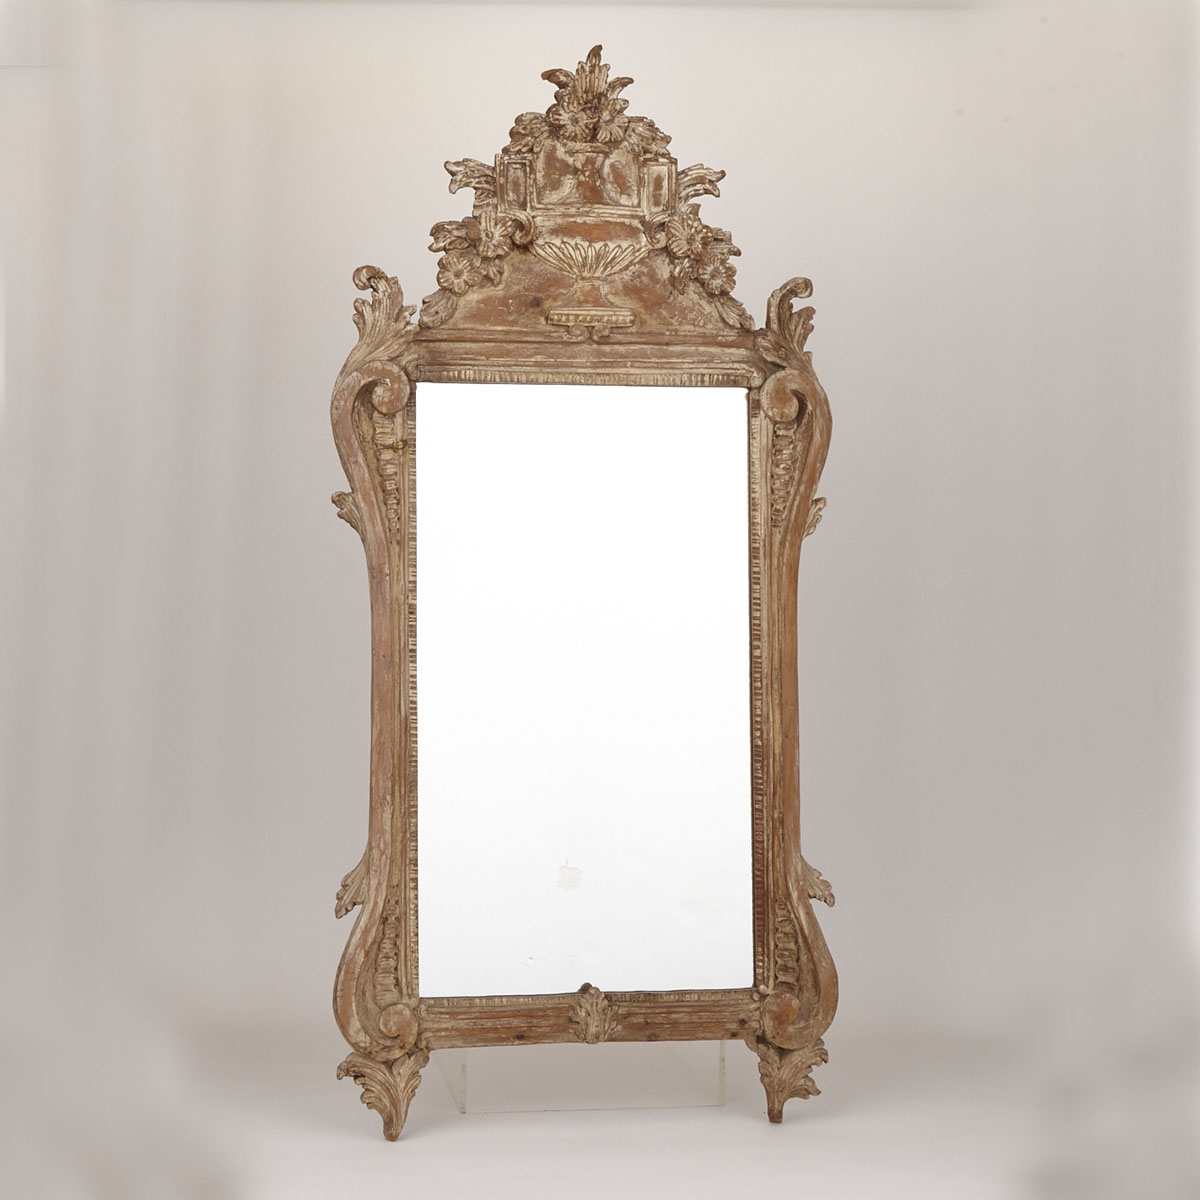 Italian Neoclassical Style Carved Mirror, early 20th century